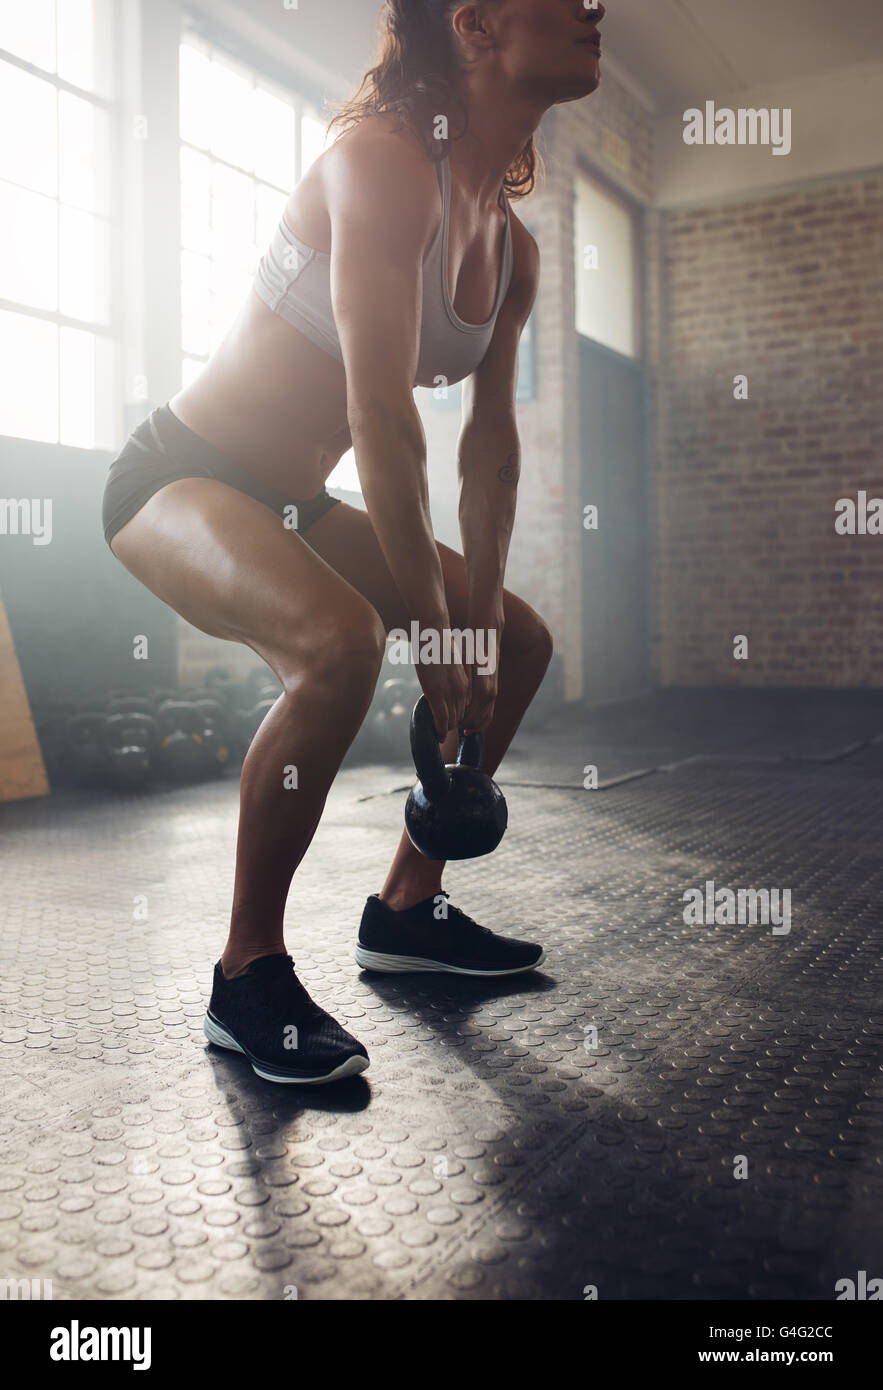 Athletic woman exercising with kettle bell while being in squat position. Muscular woman doing crossfit workout at gym. Stock Photo